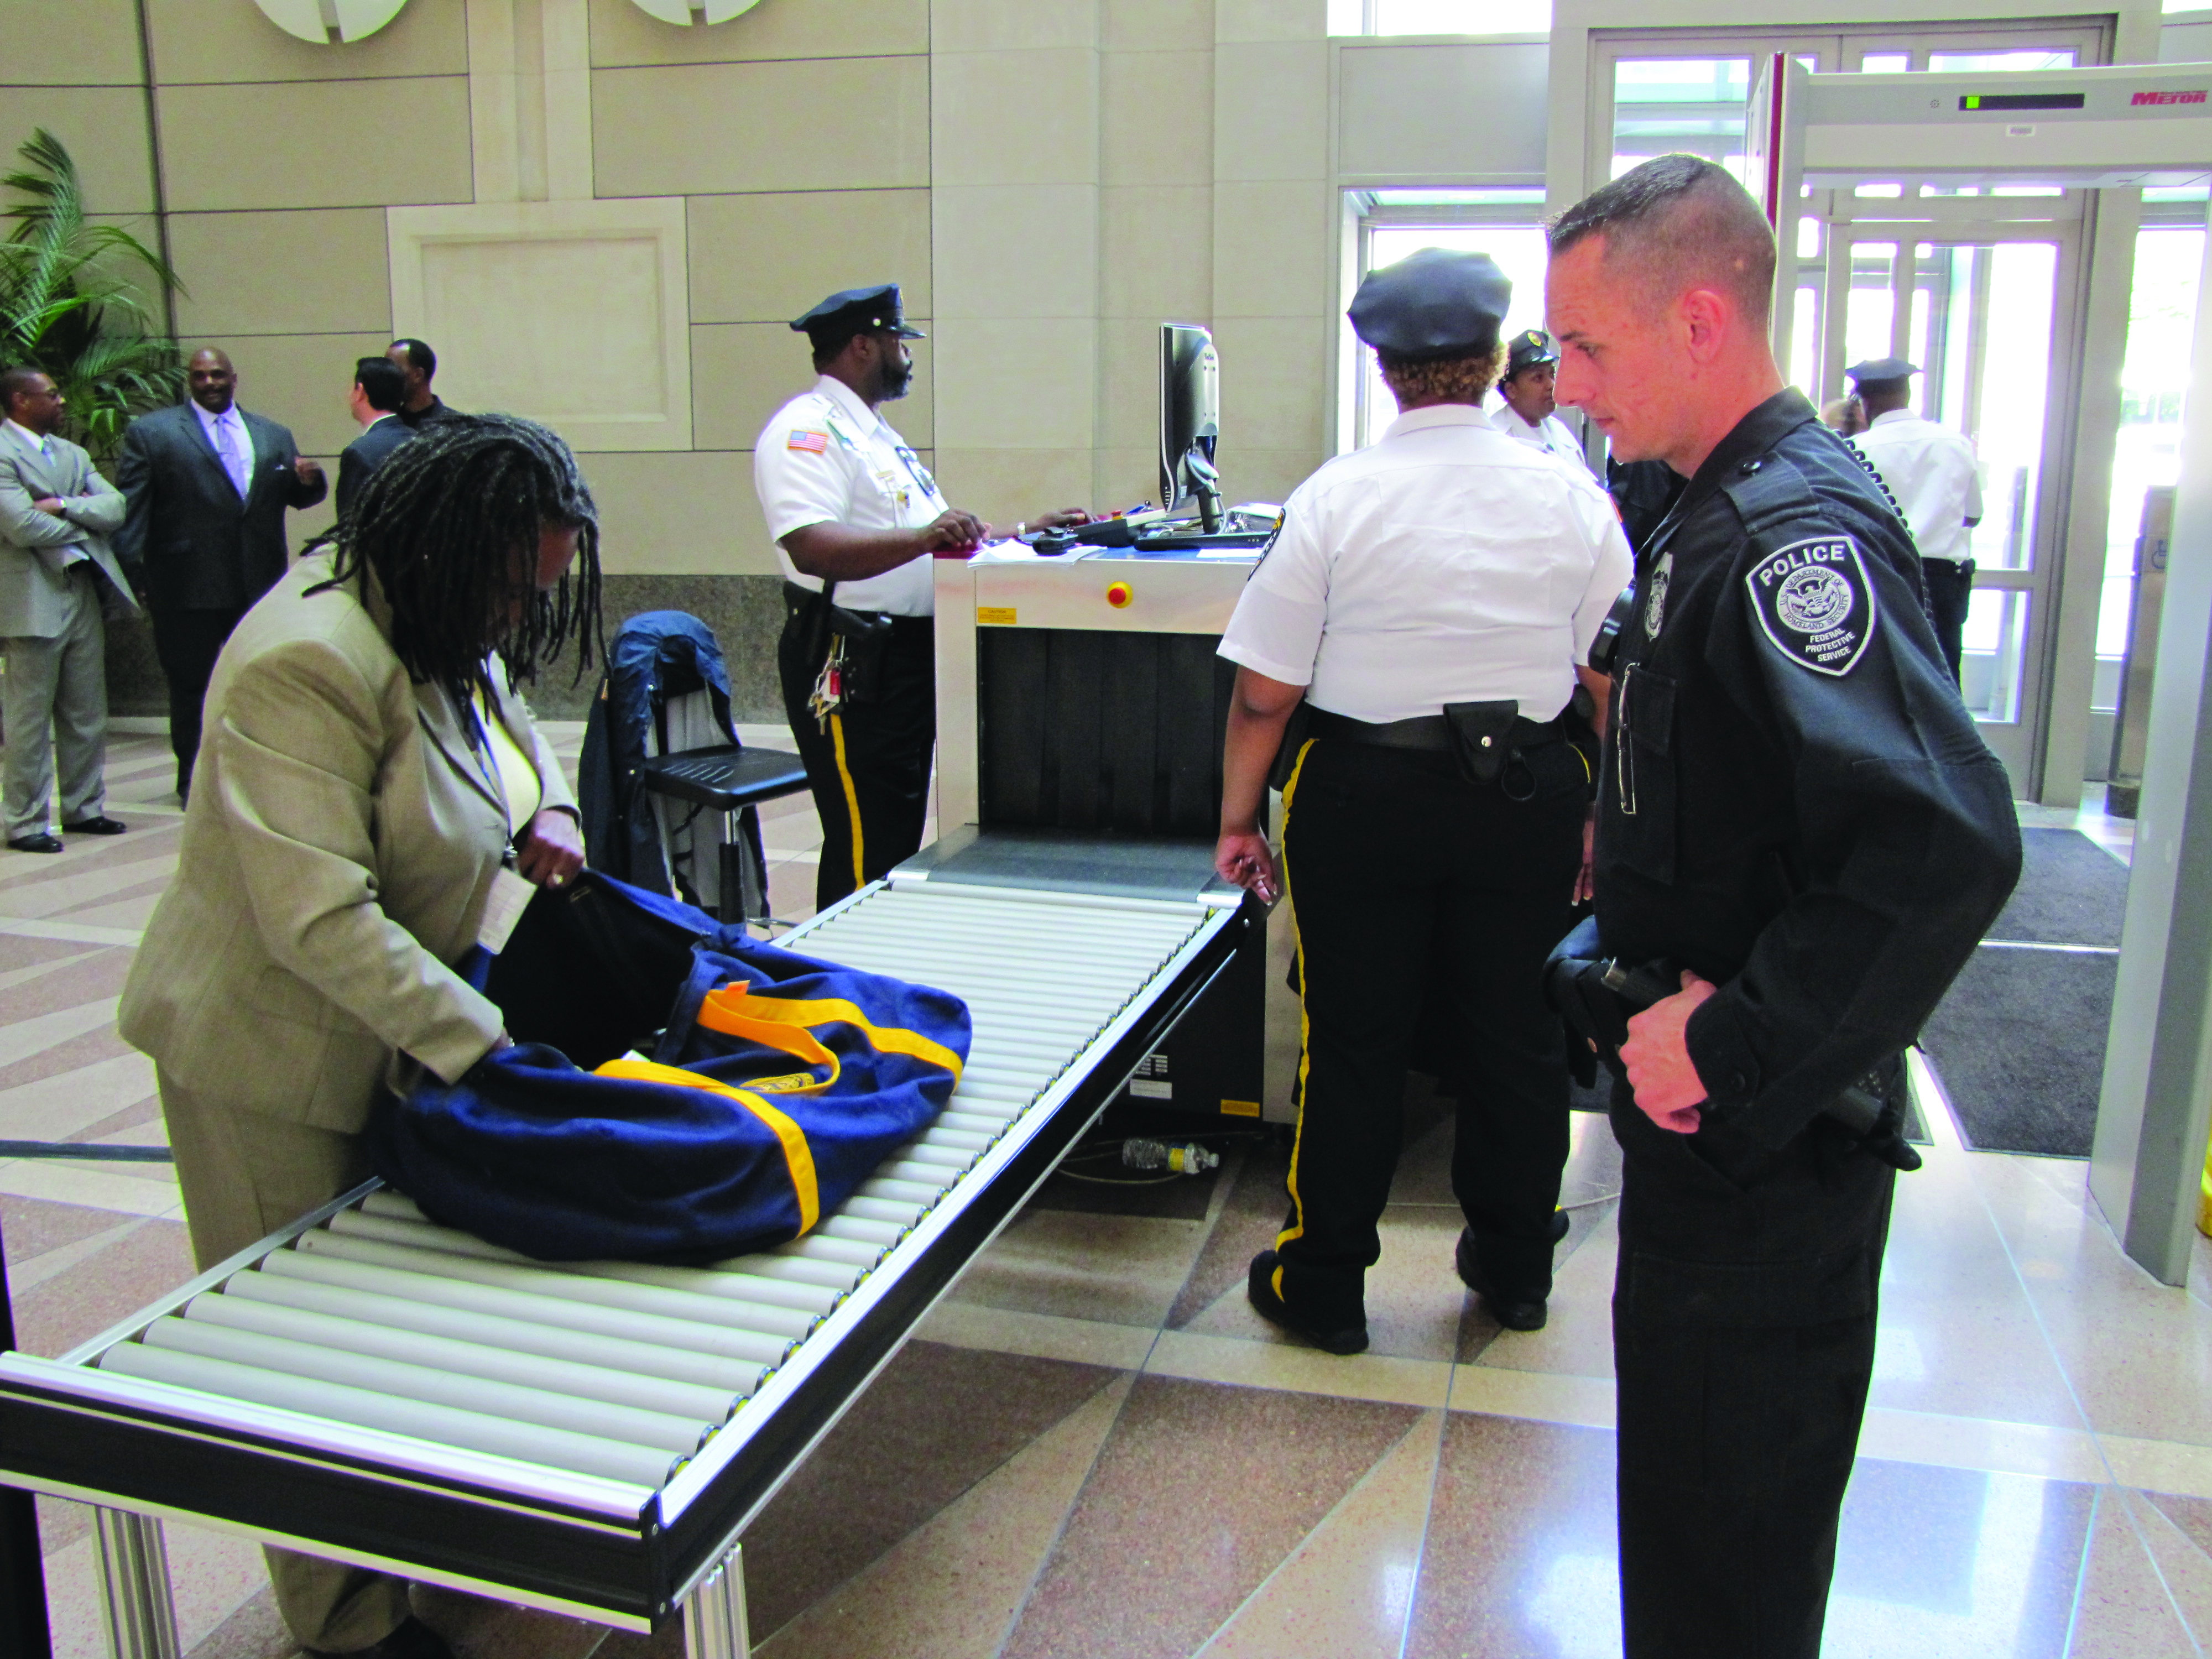 Federal Protective Service Officers ensure safety of those who pass through federal buildings